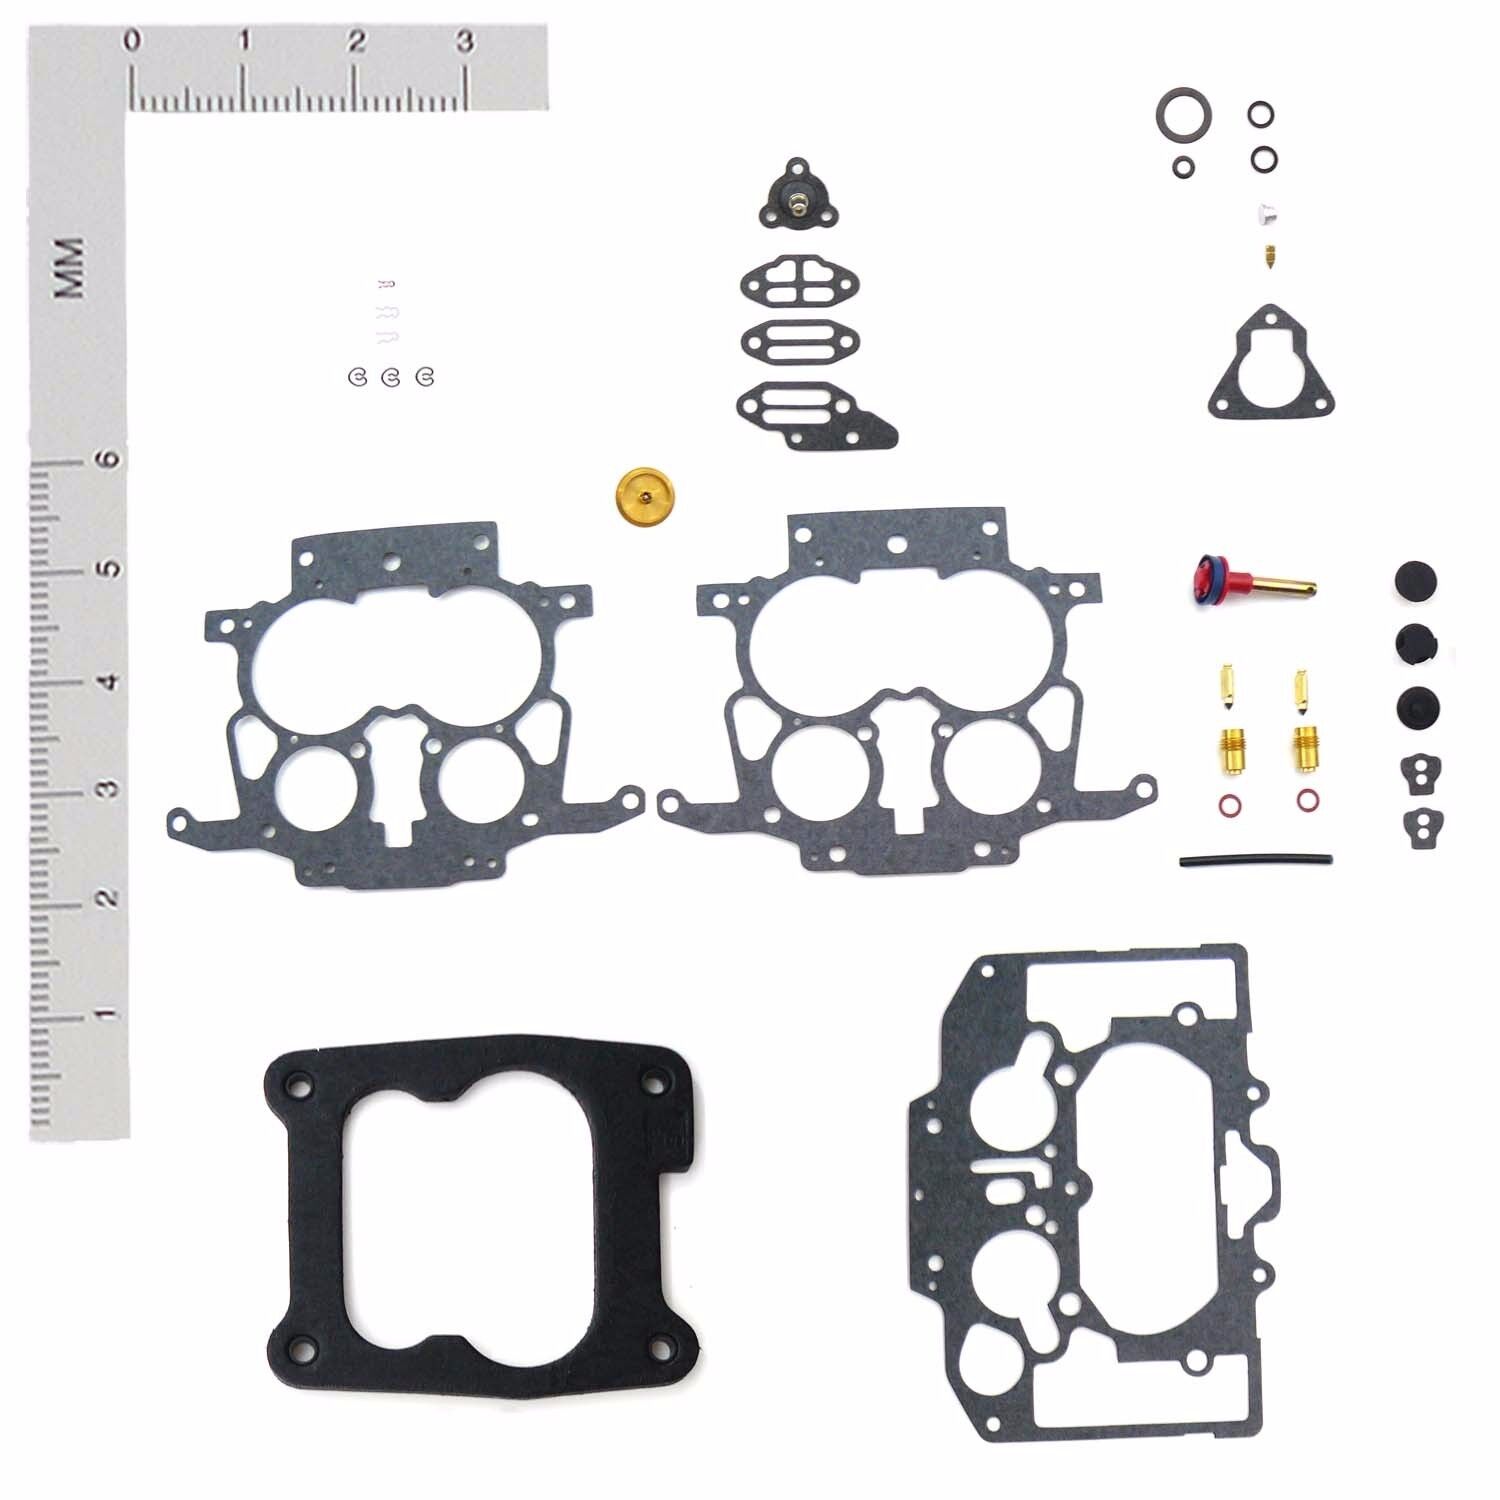 CARTER THERMOQUAD CARB KIT 1978-1984 CHRYSLER DODGE PLYMOUTH 318-360-400-440